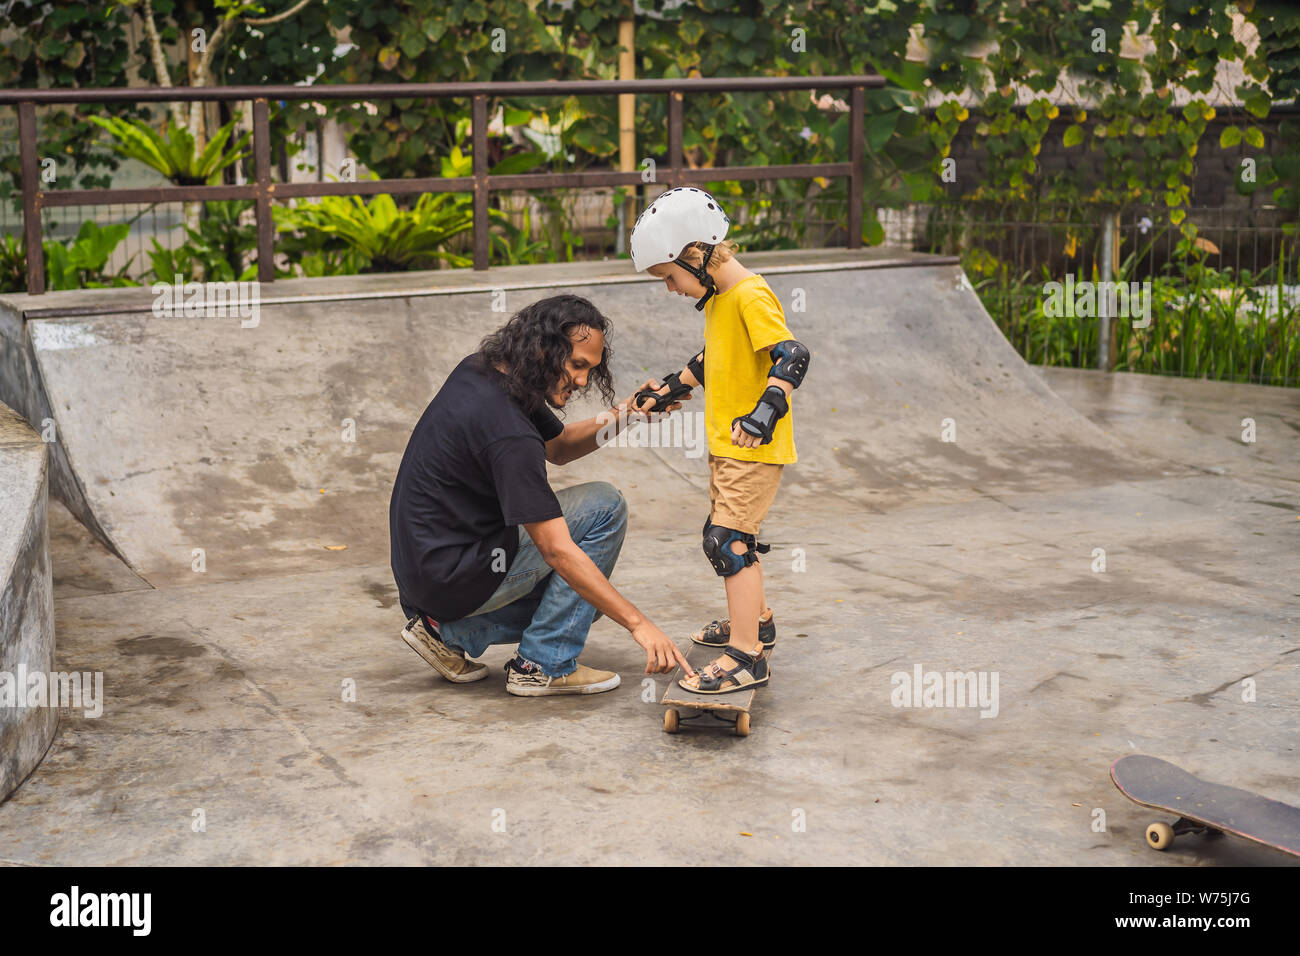 Athletic boy learns to skateboard with a trainer in a skate park. Children  education, sports Stock Photo - Alamy